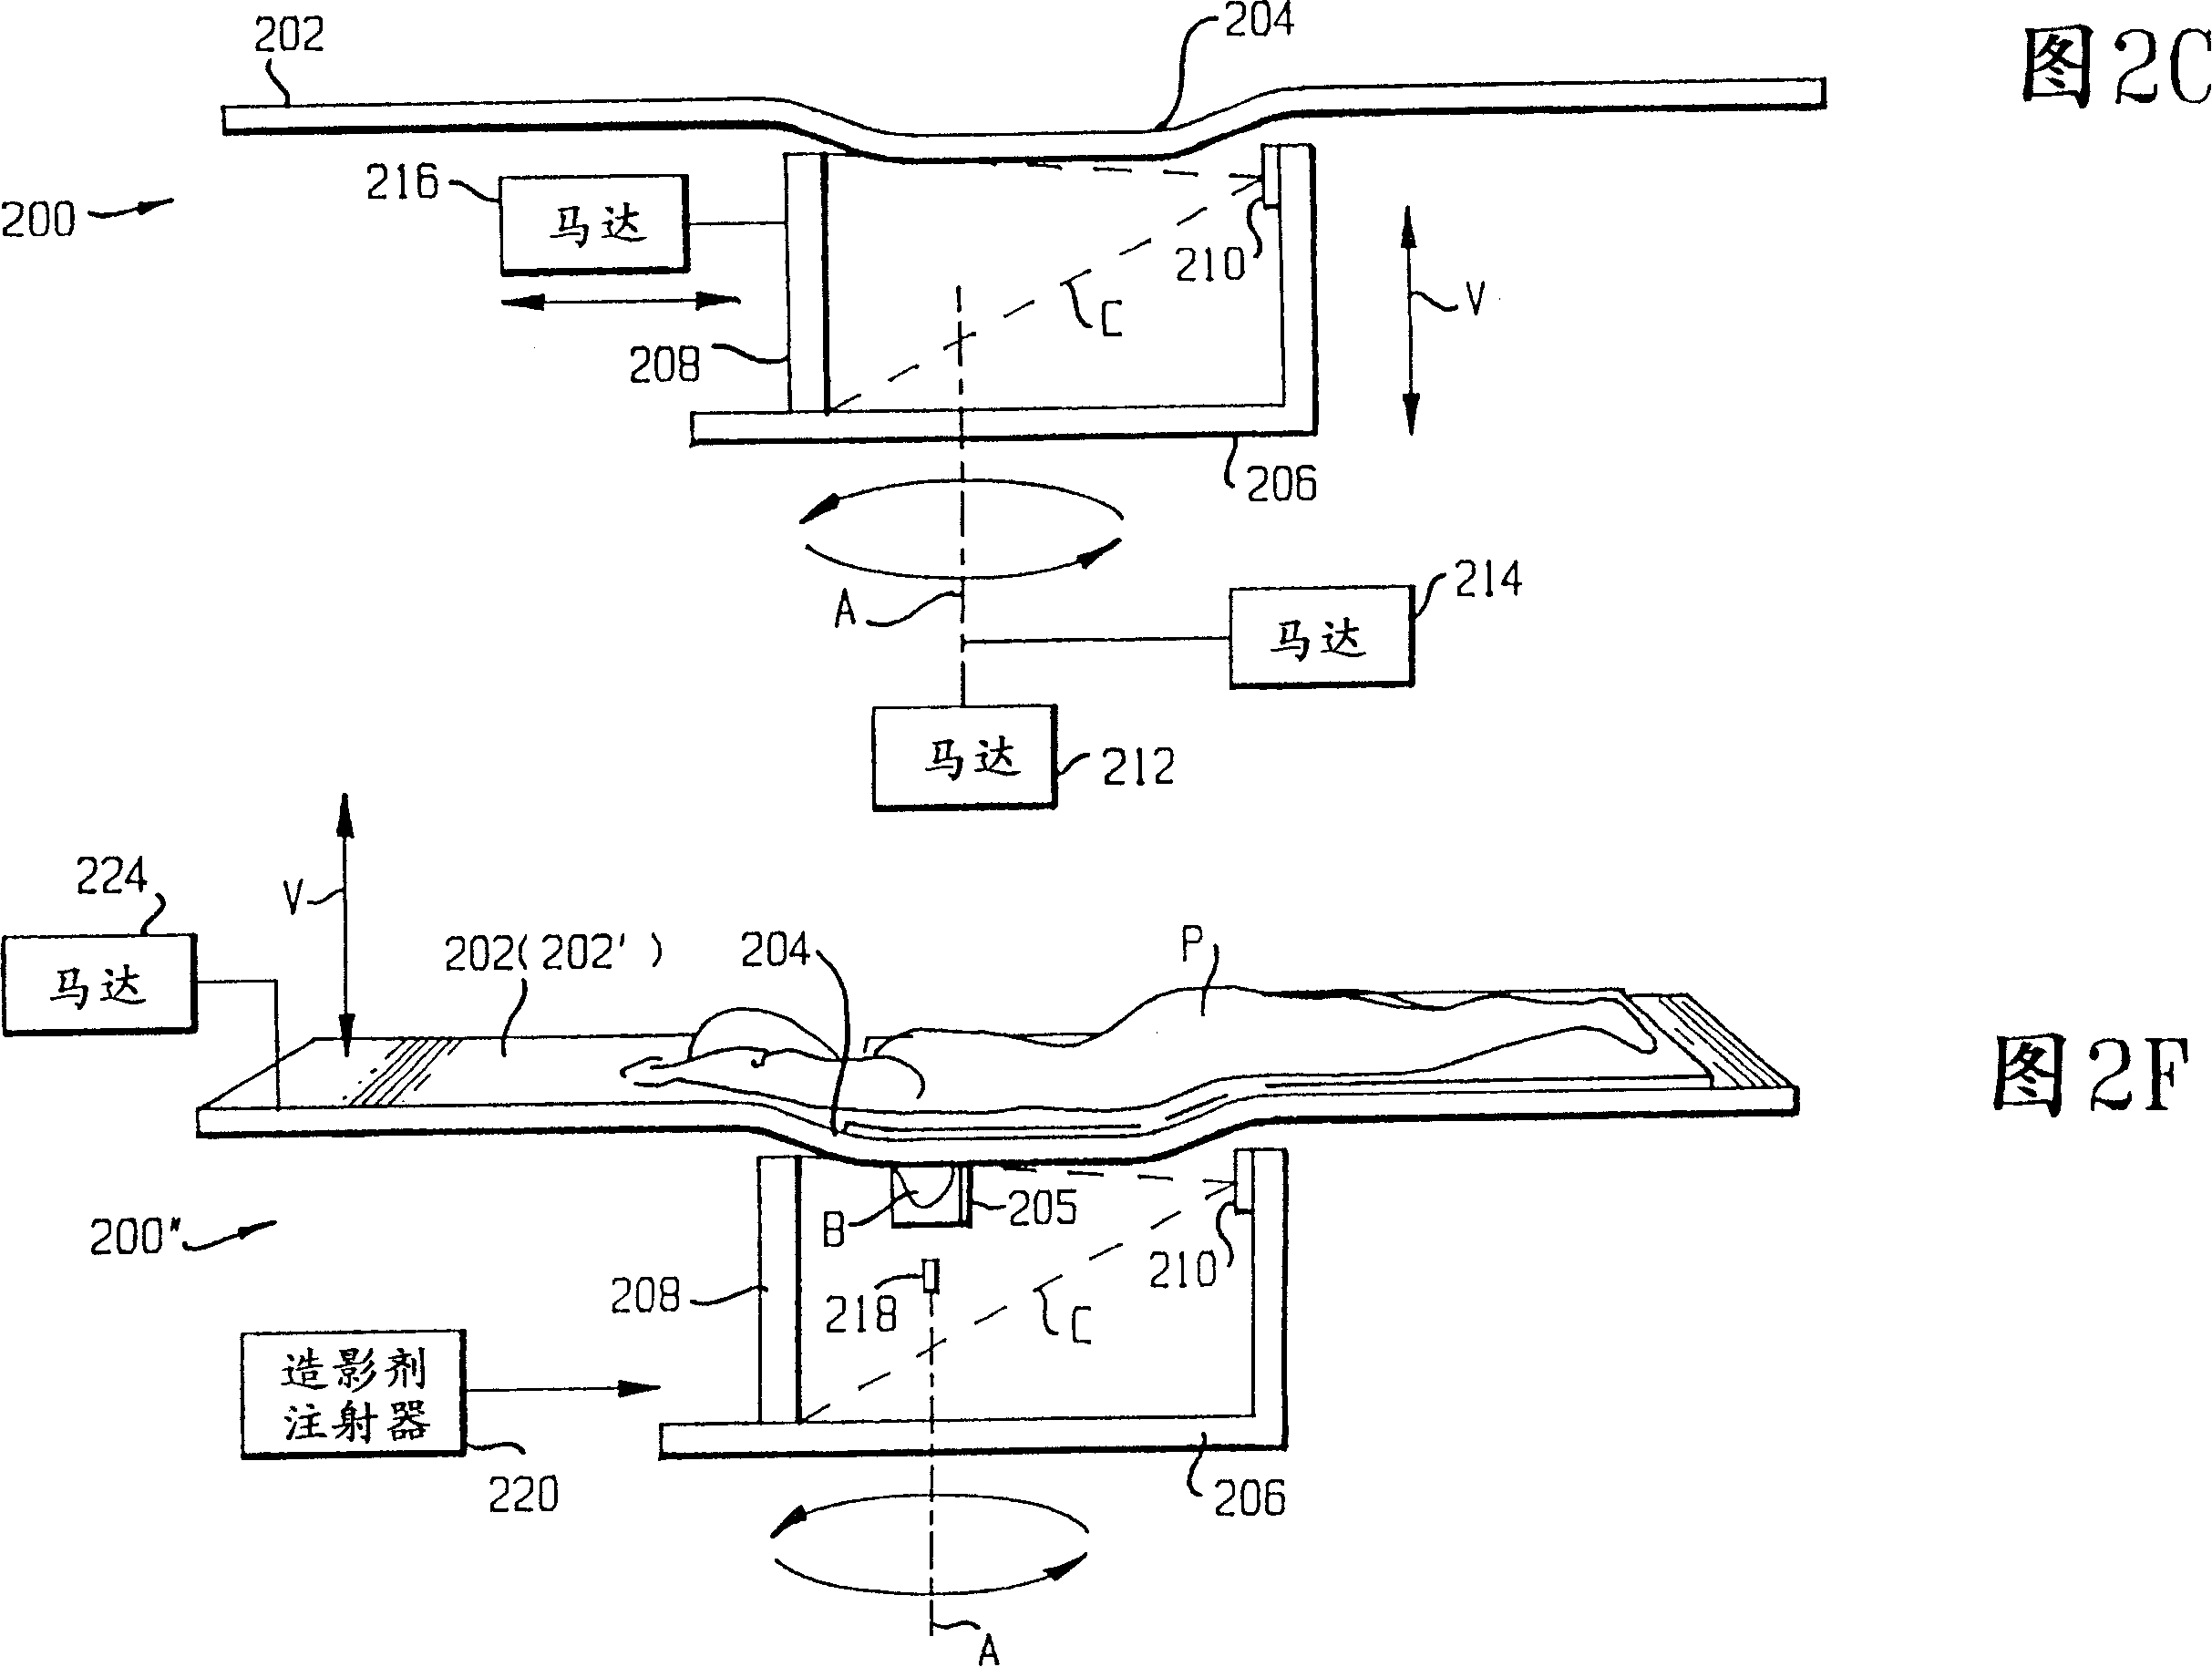 Apparatus and method for cone beam volume computed tomography mammography